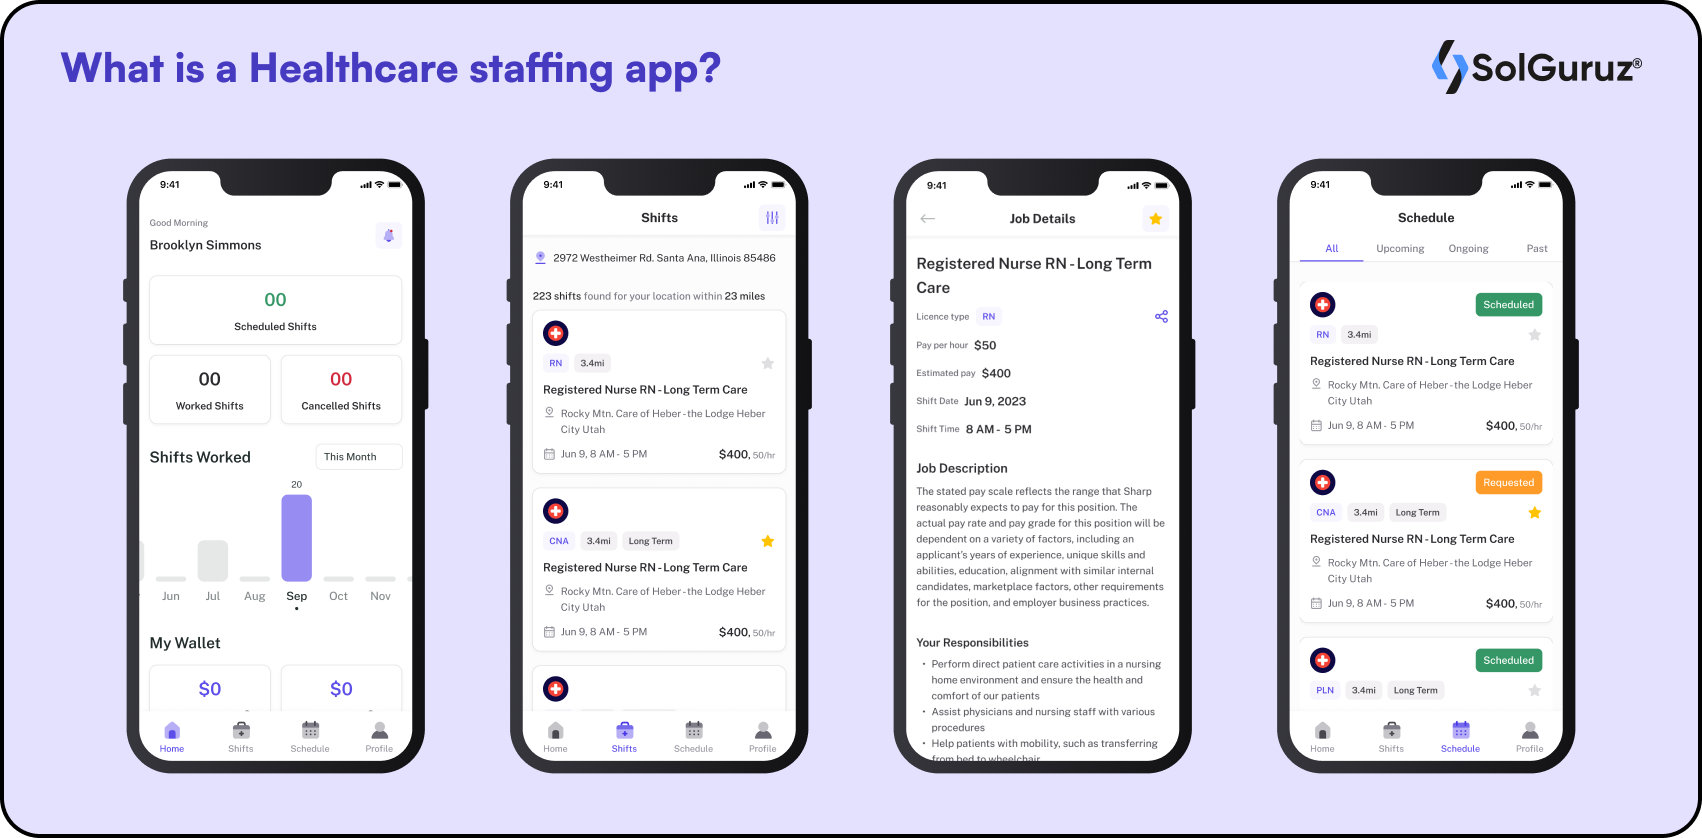 What is a Healthcare staffing app